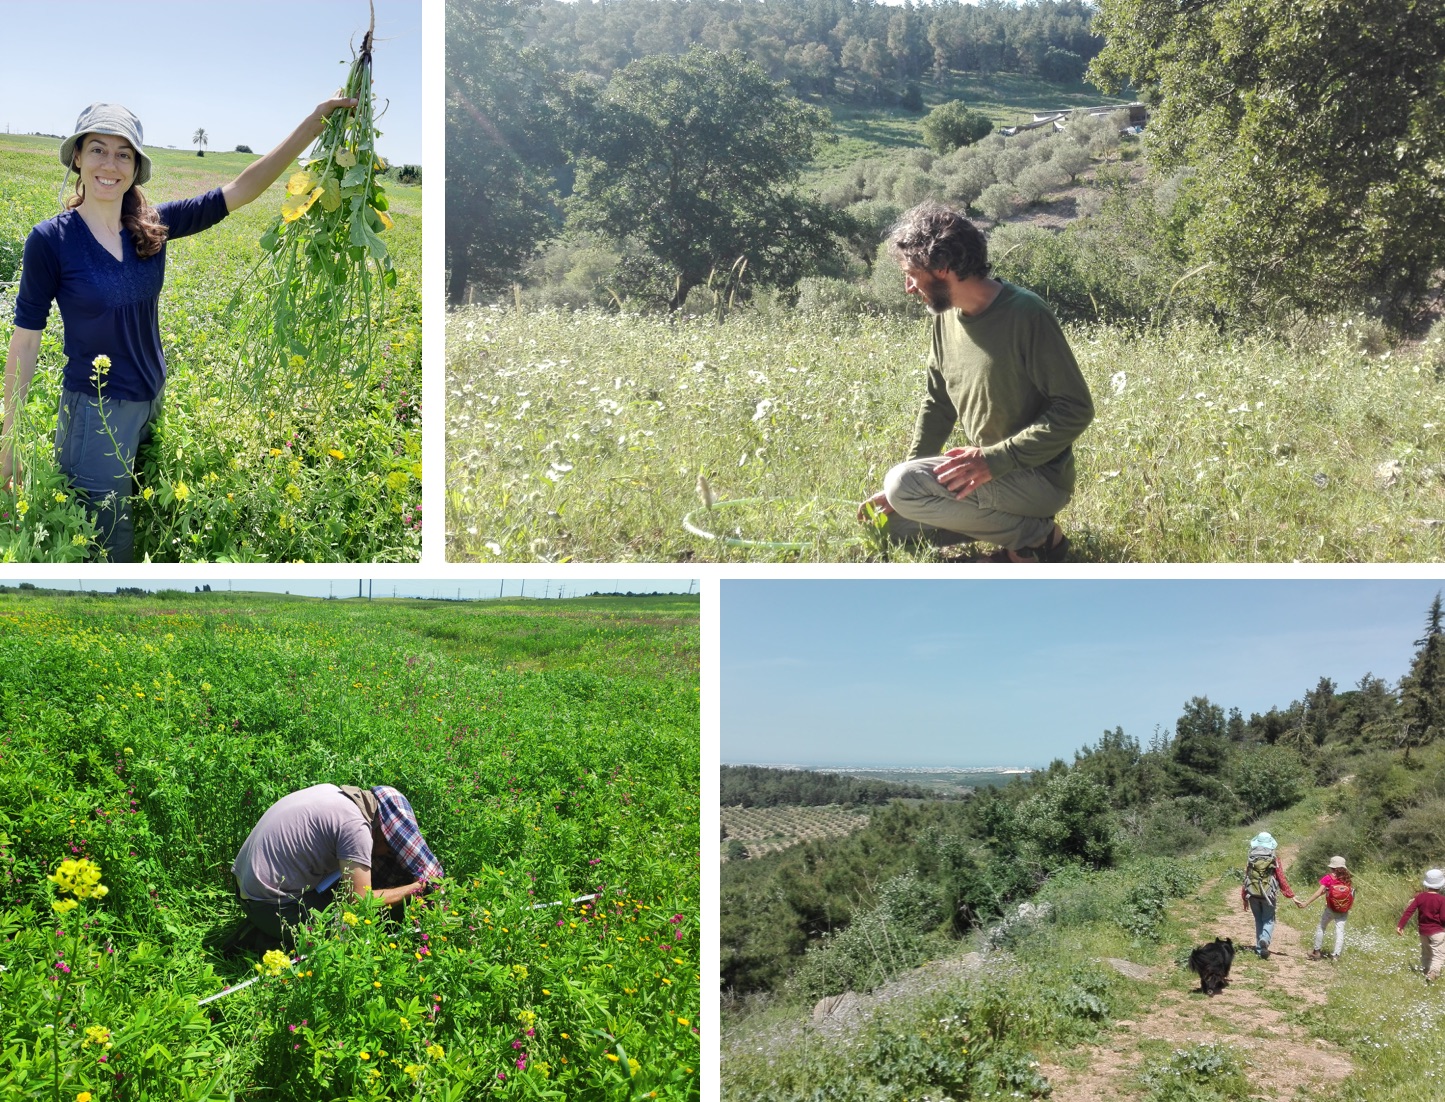 Hila Segre and Asaf Sadeh surveying Raphanus raphanistrum and other species in Israel